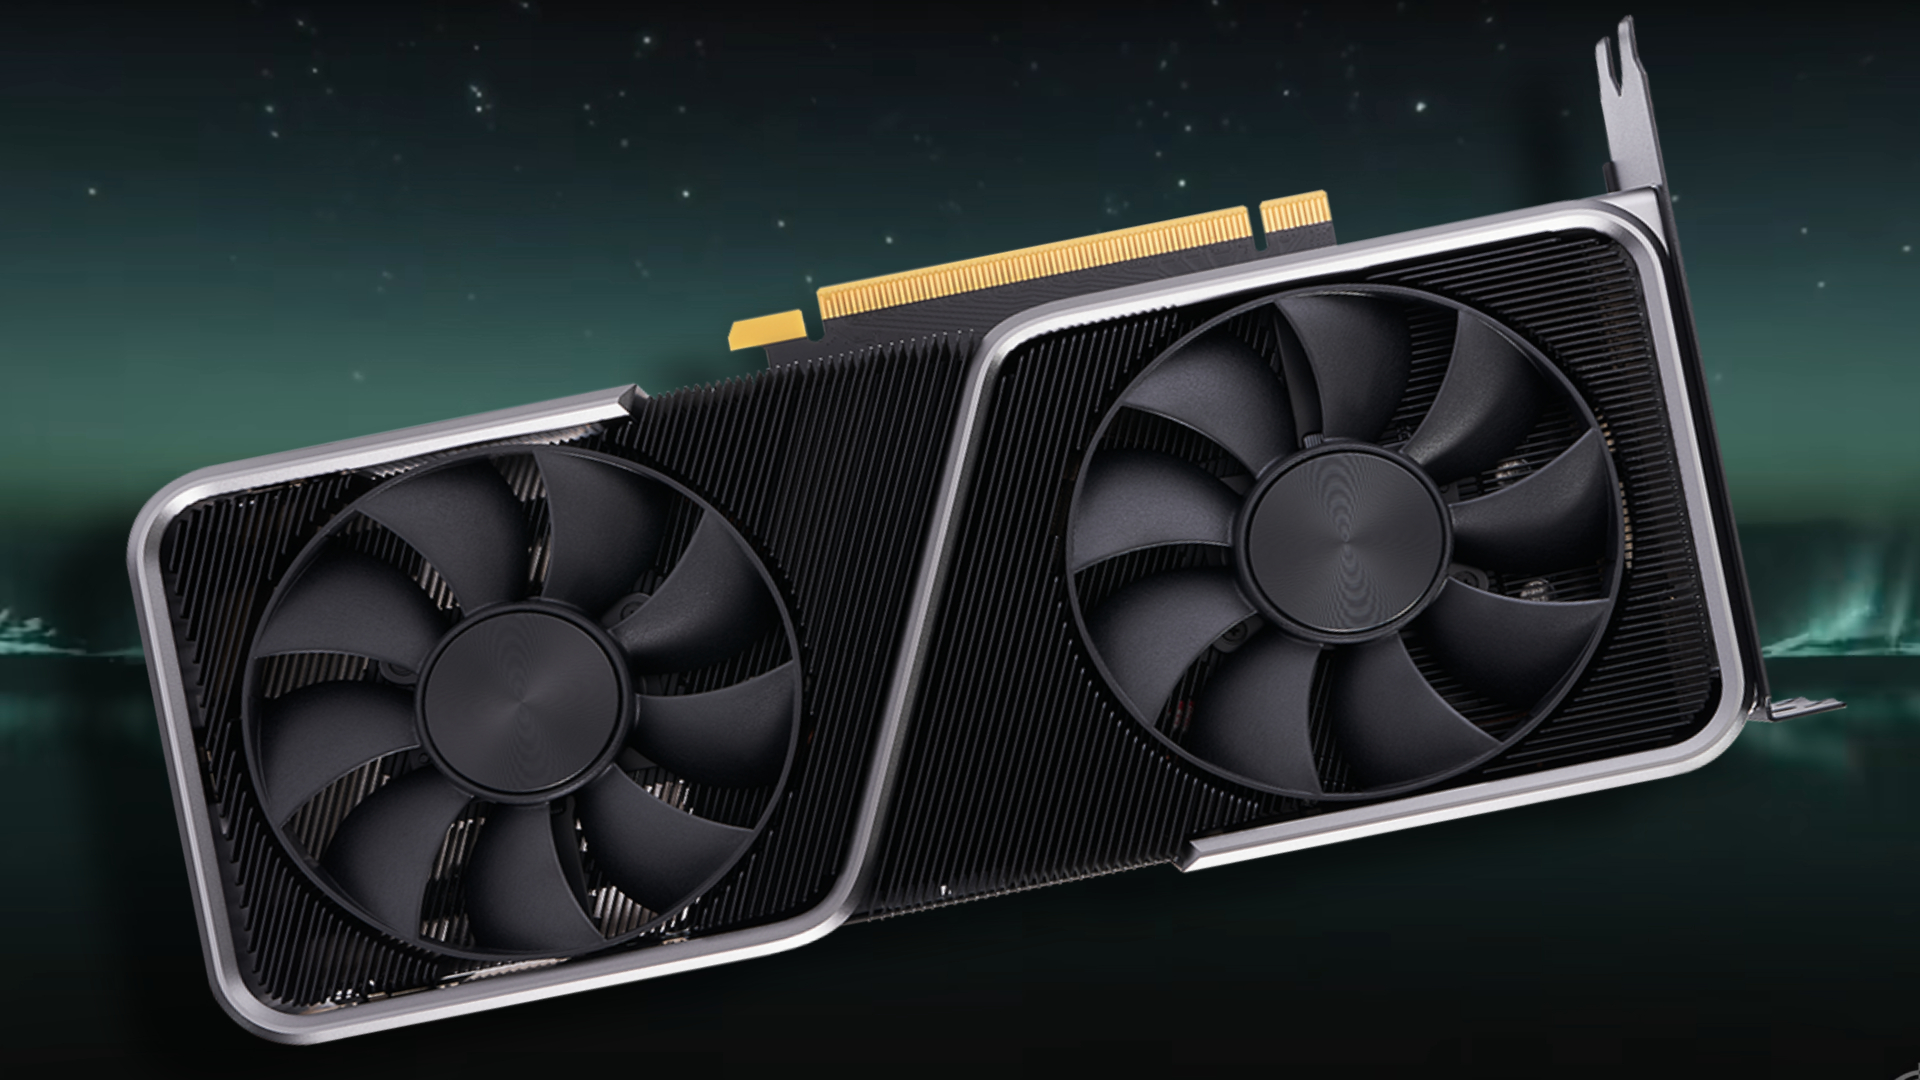 Nvidia RTX 4070 – release date rumours, price, specs, and benchmarks